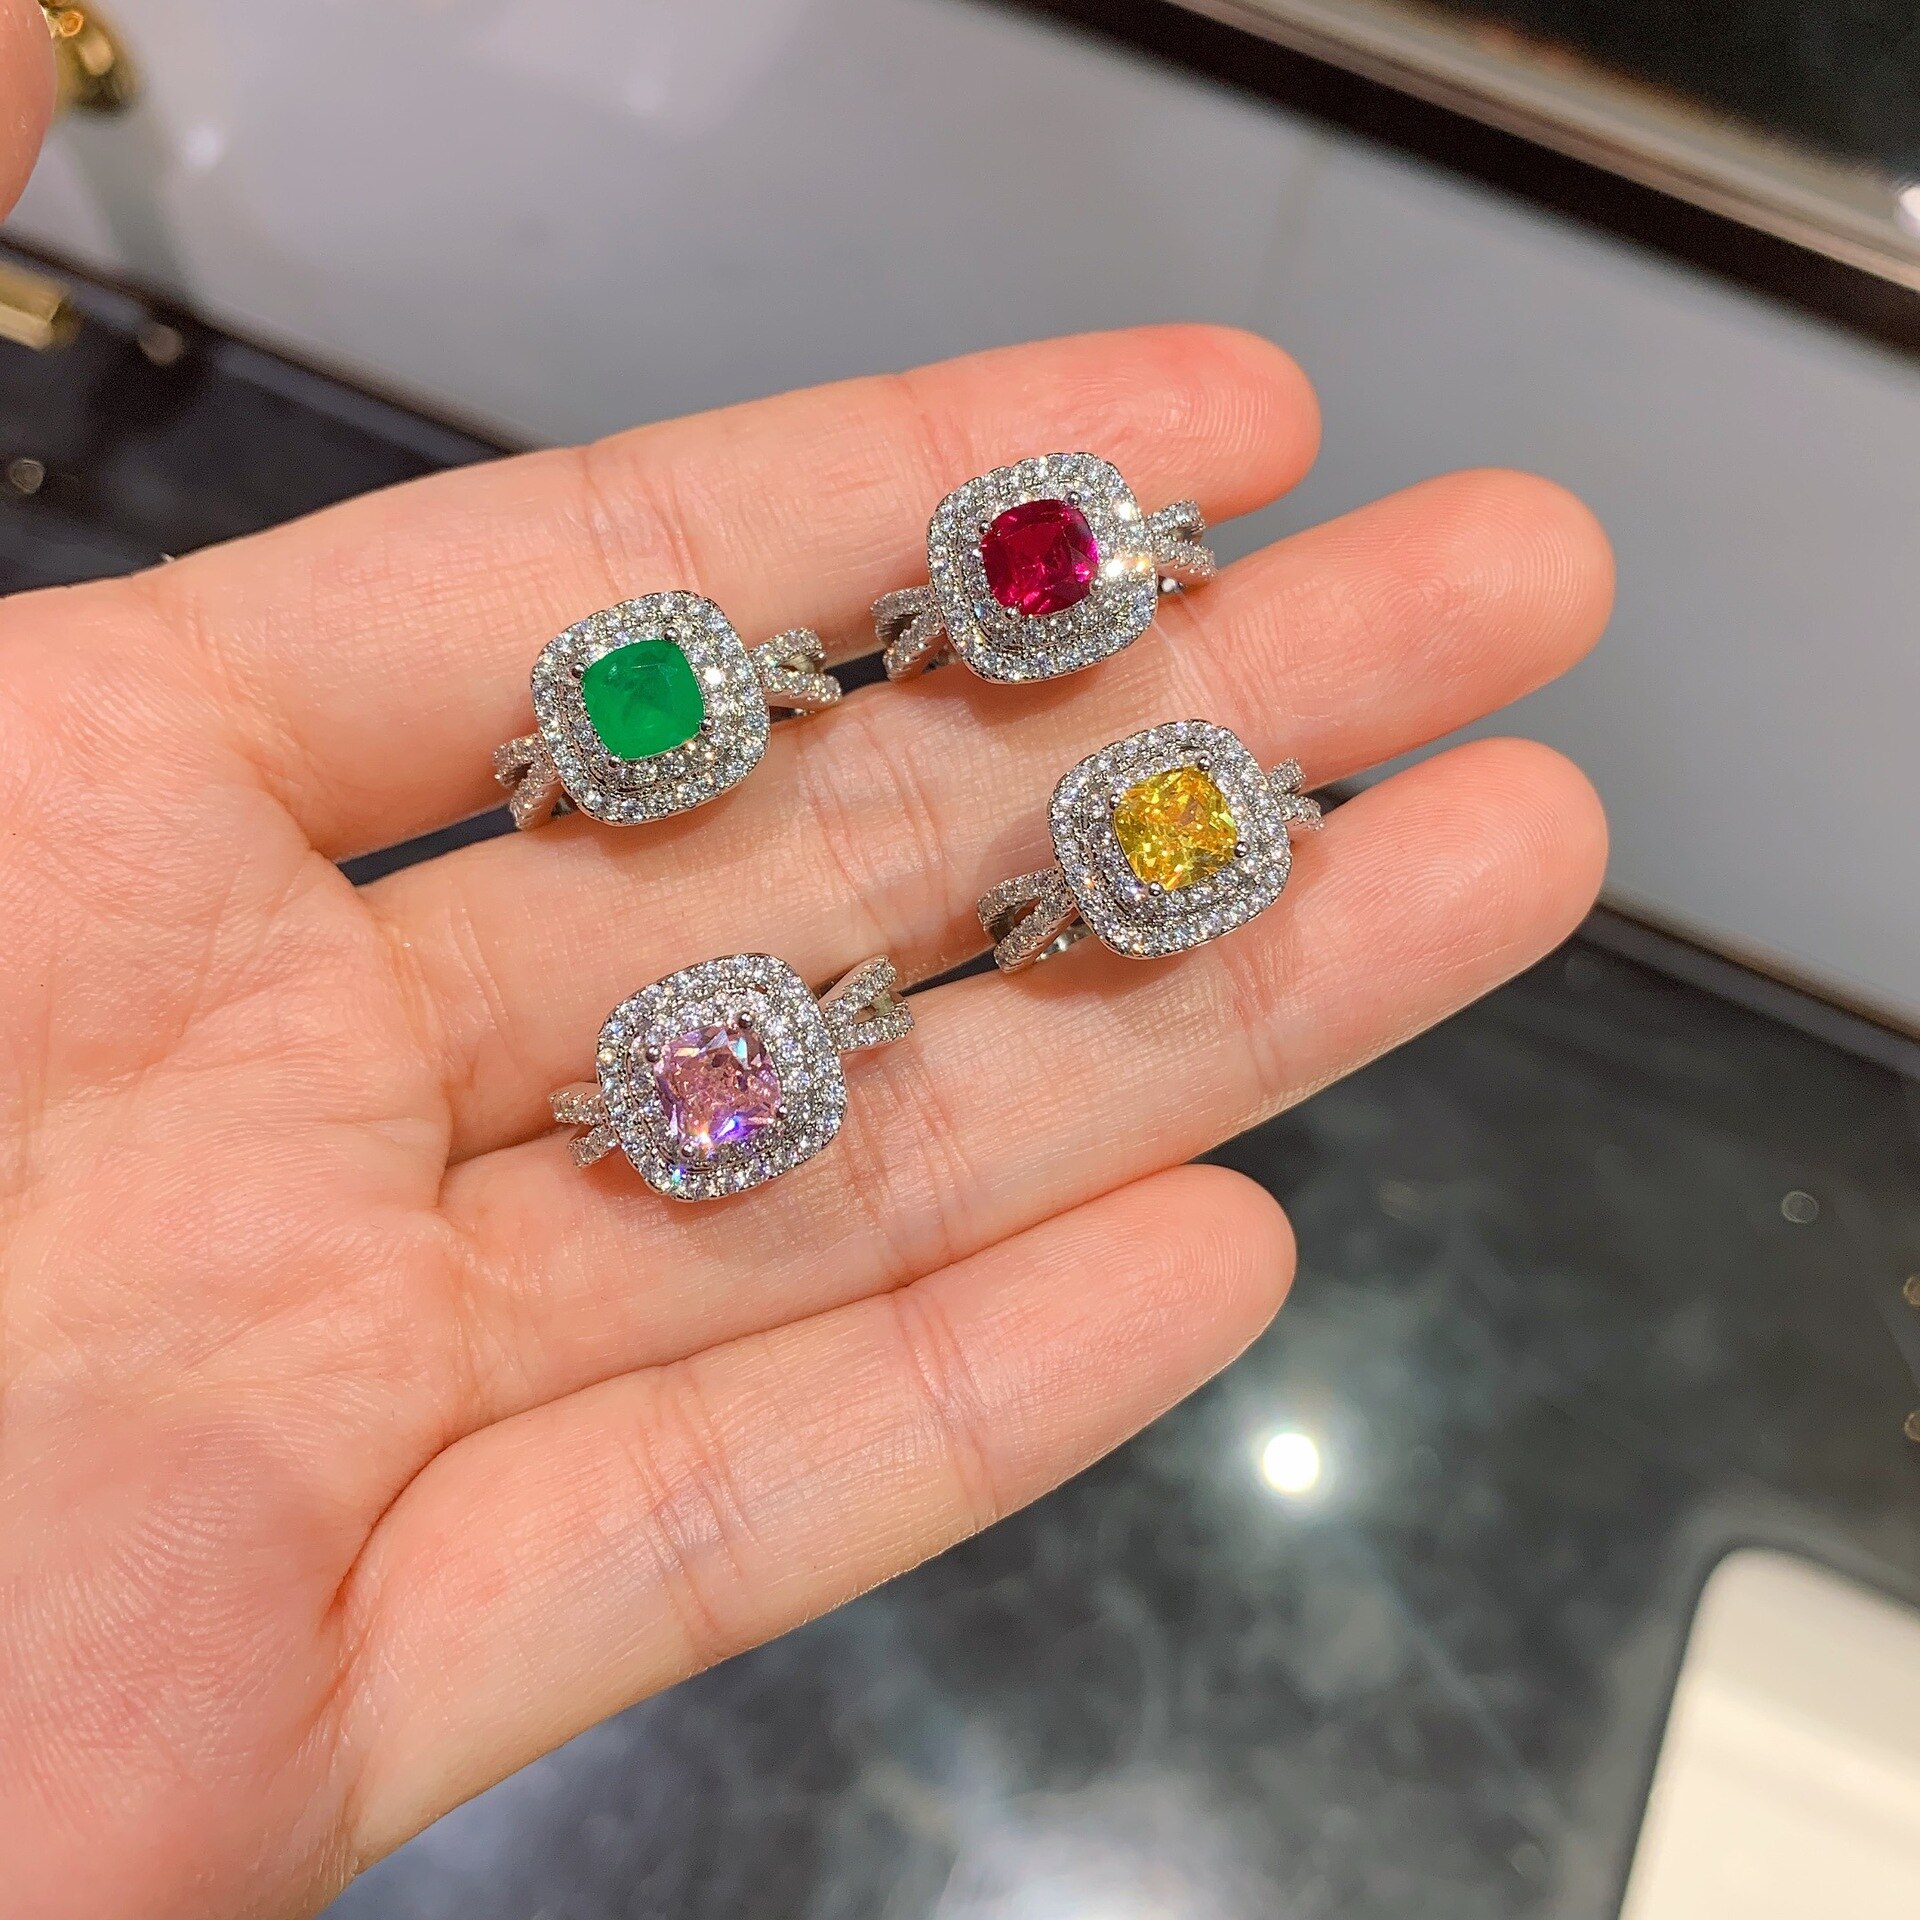 Small-Fresh-Exquisite-Luxurious-Square-Emeralds-Sapphire-Stone-Open-Adjustable-Vintage-Rings-for-Women-Accessori-Free.jpg